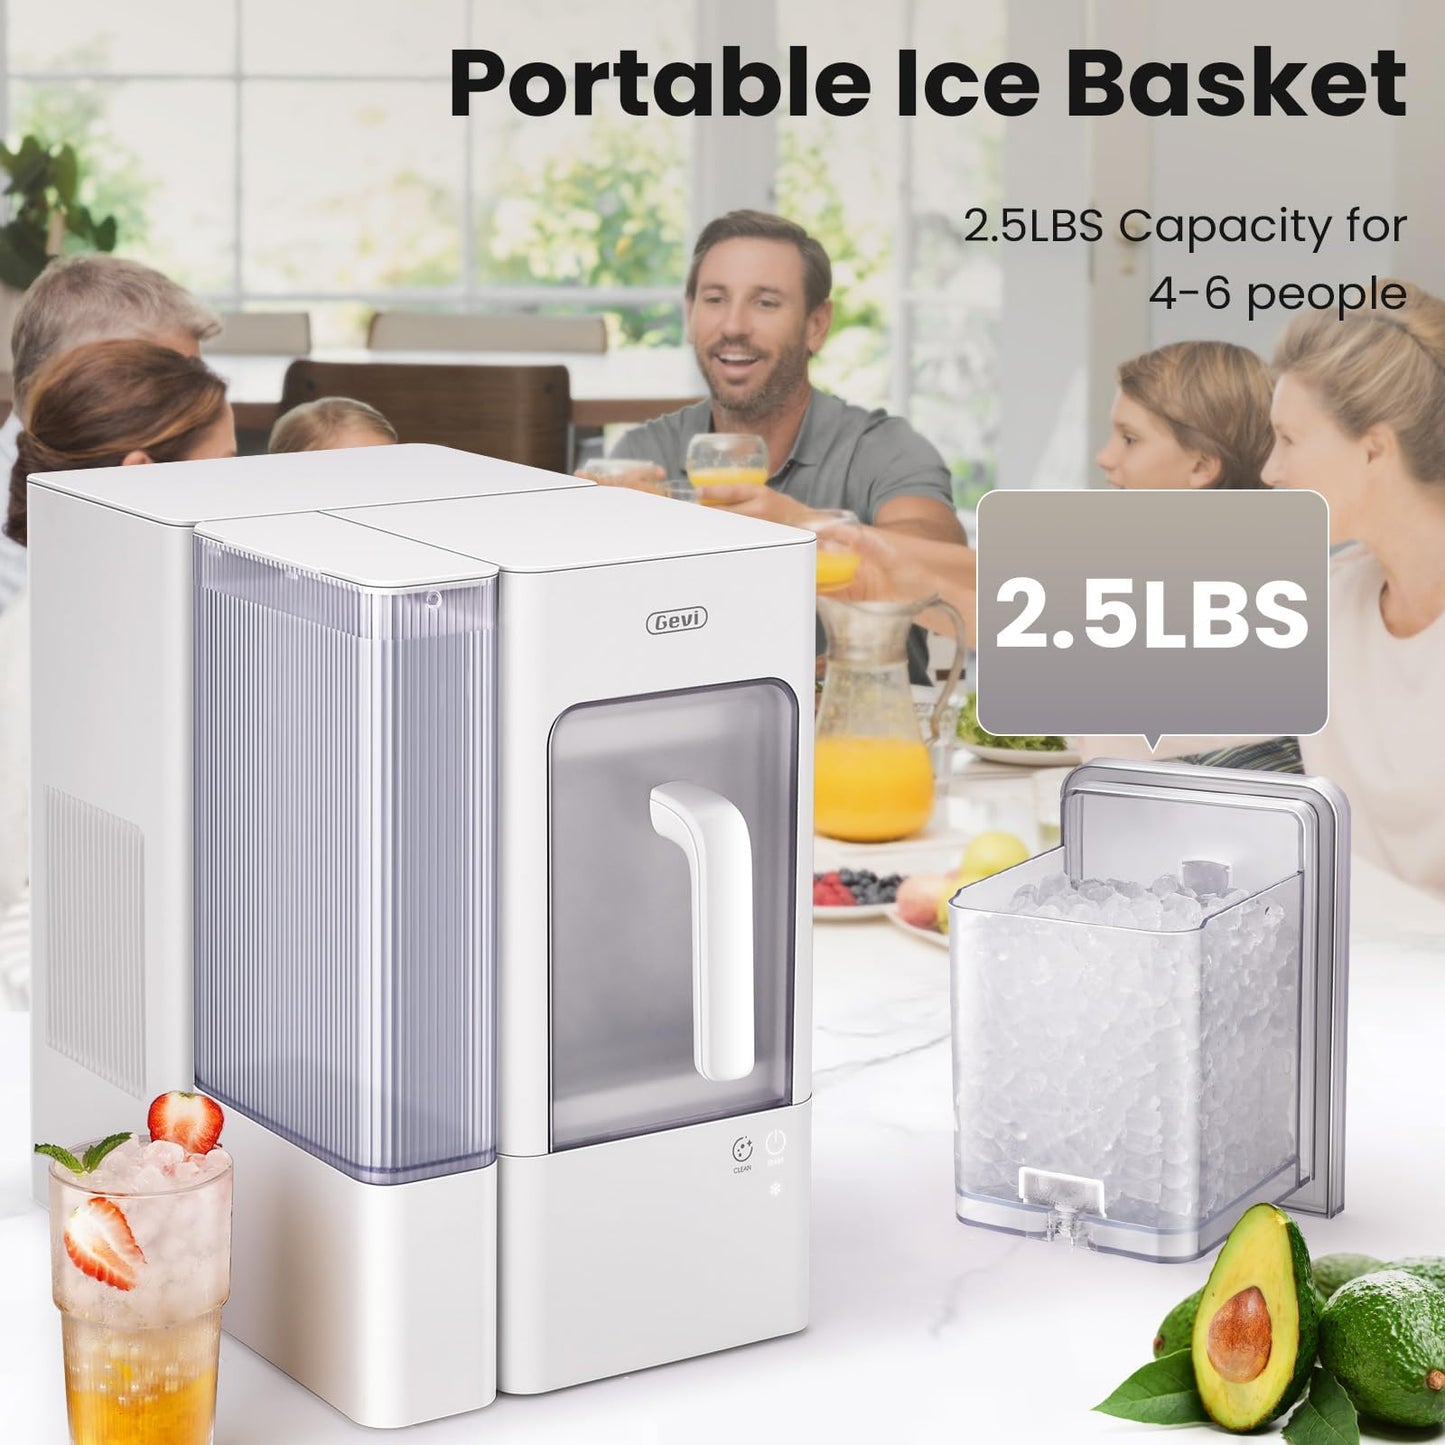 Gevi Adella Nugget Ice Maker Countertop, Chewable Pellet Ice Machine with Portable Ice Basket Large Side Tank Self-Cleaning for Home Kitchen Office Party Mother Gift